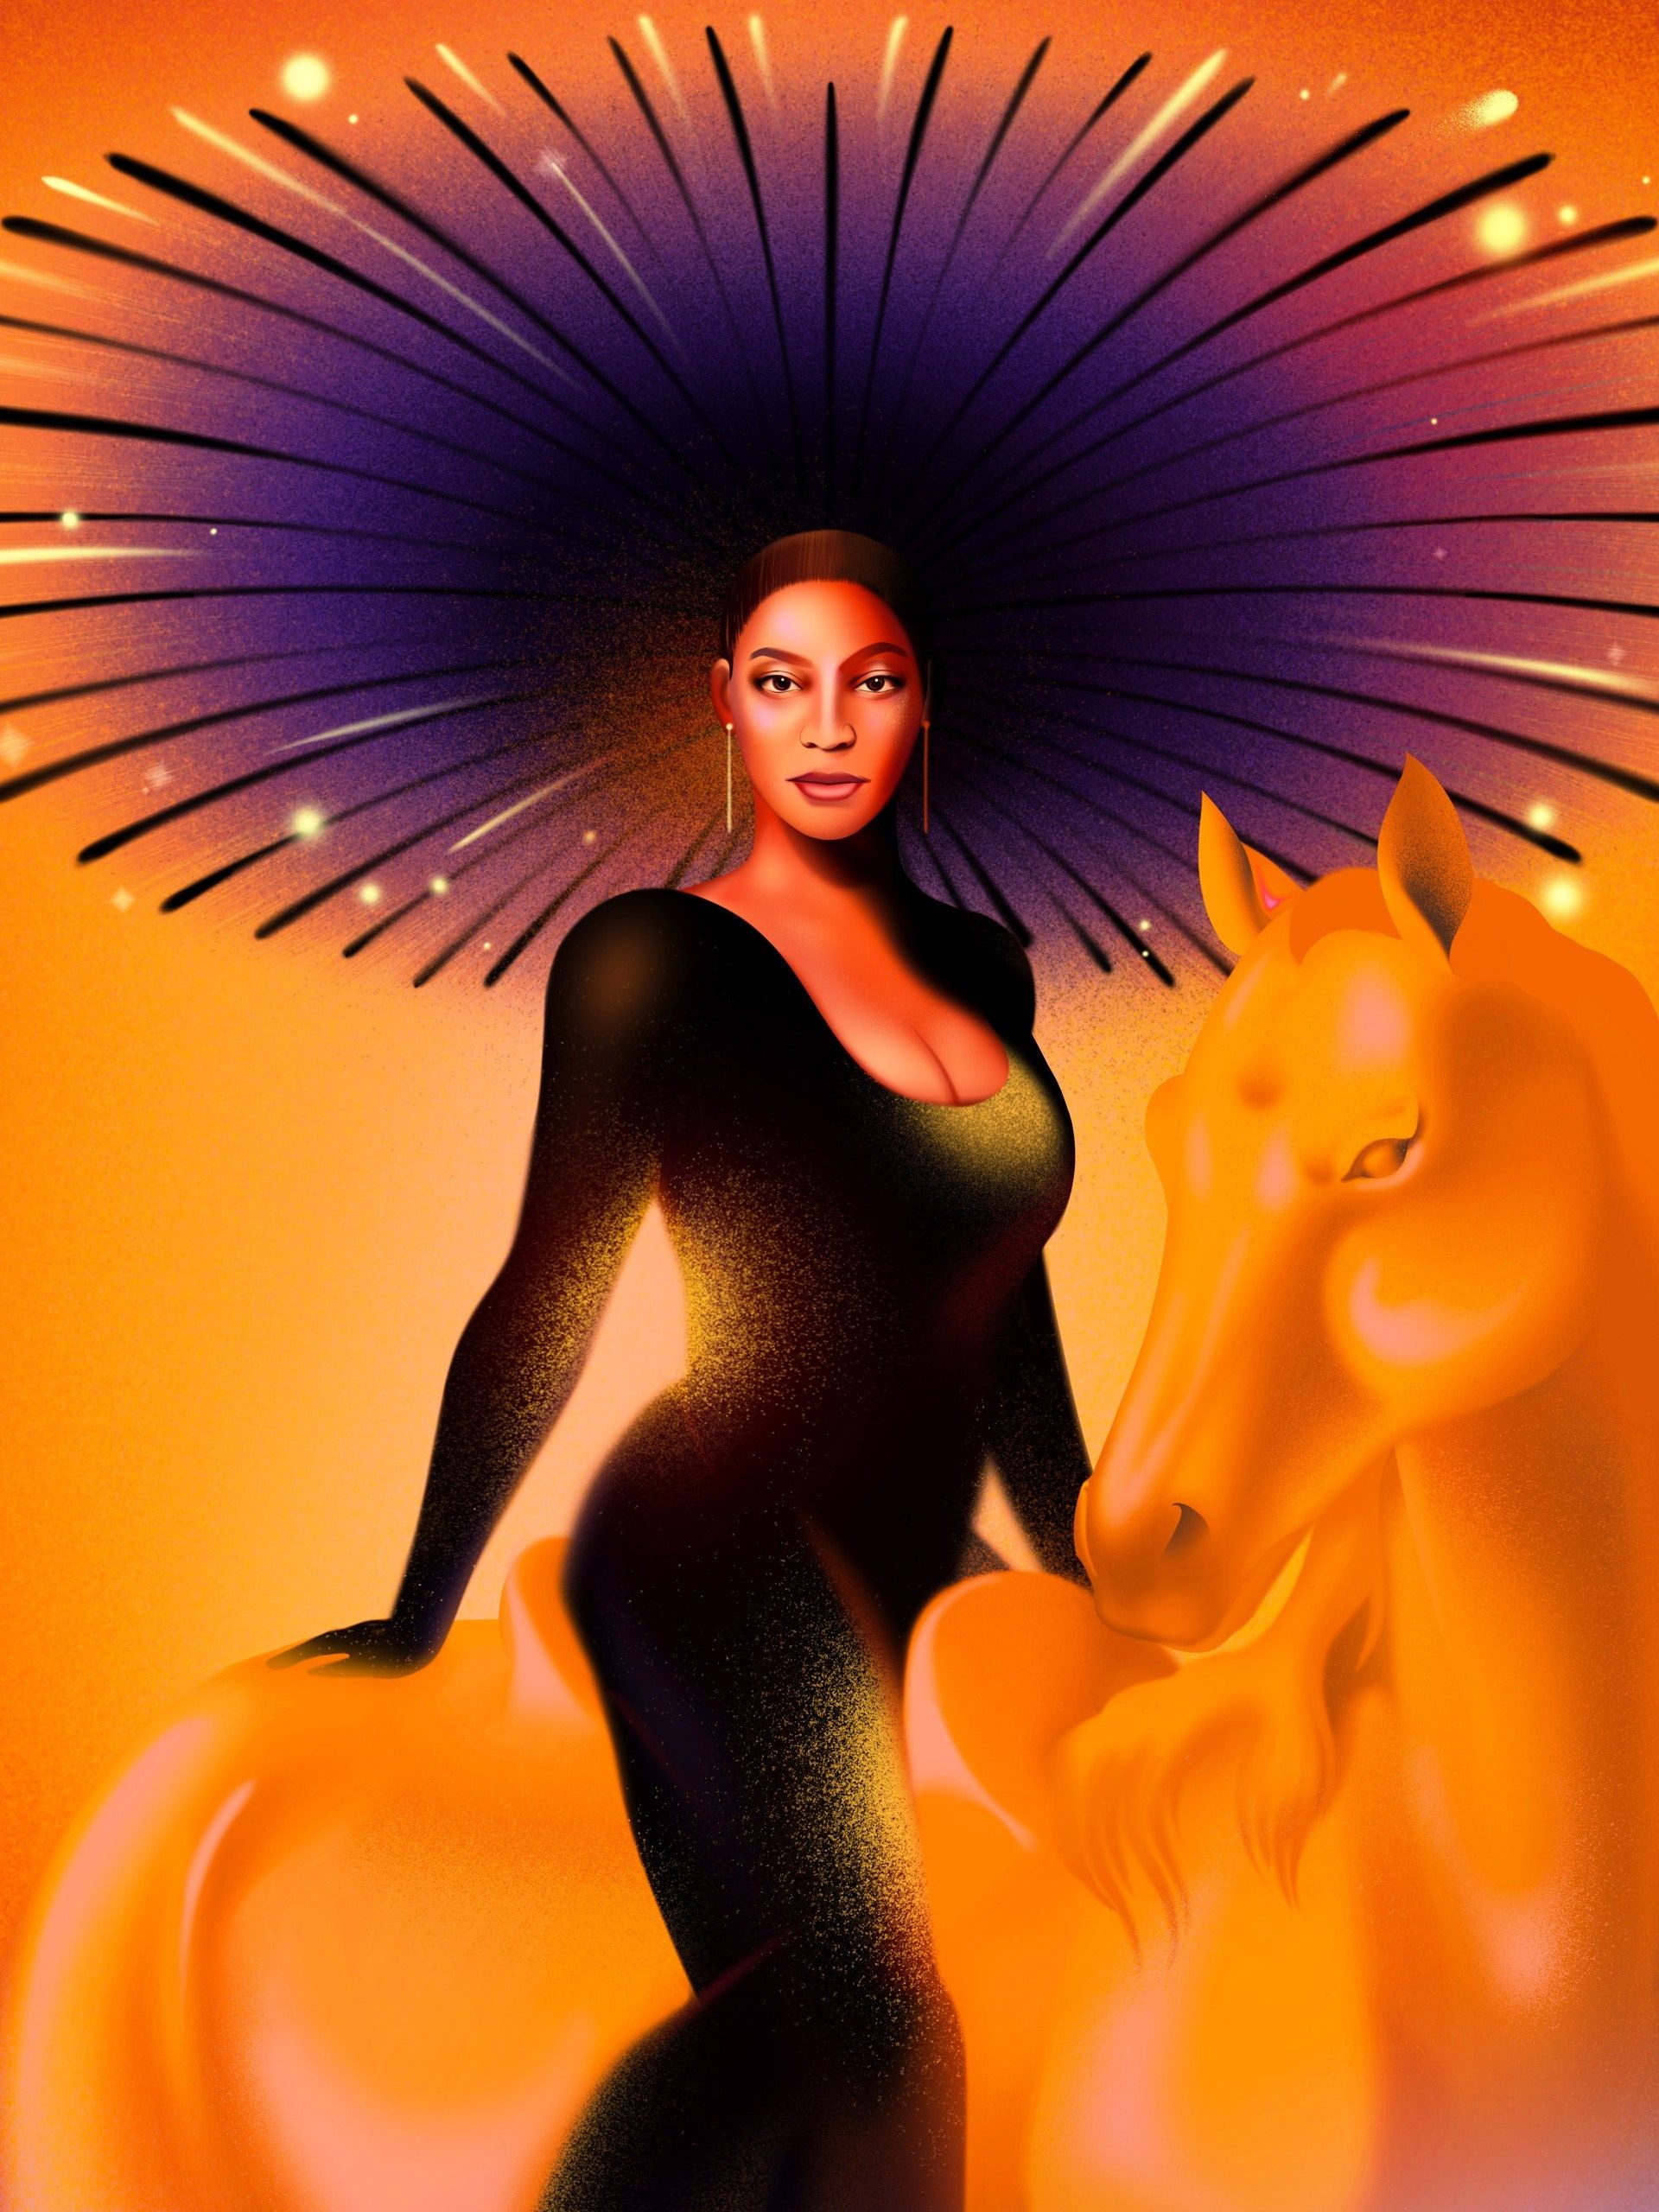 An illustration of Beyoncé, in a black leotard, sitting on a horse. - Beyonce